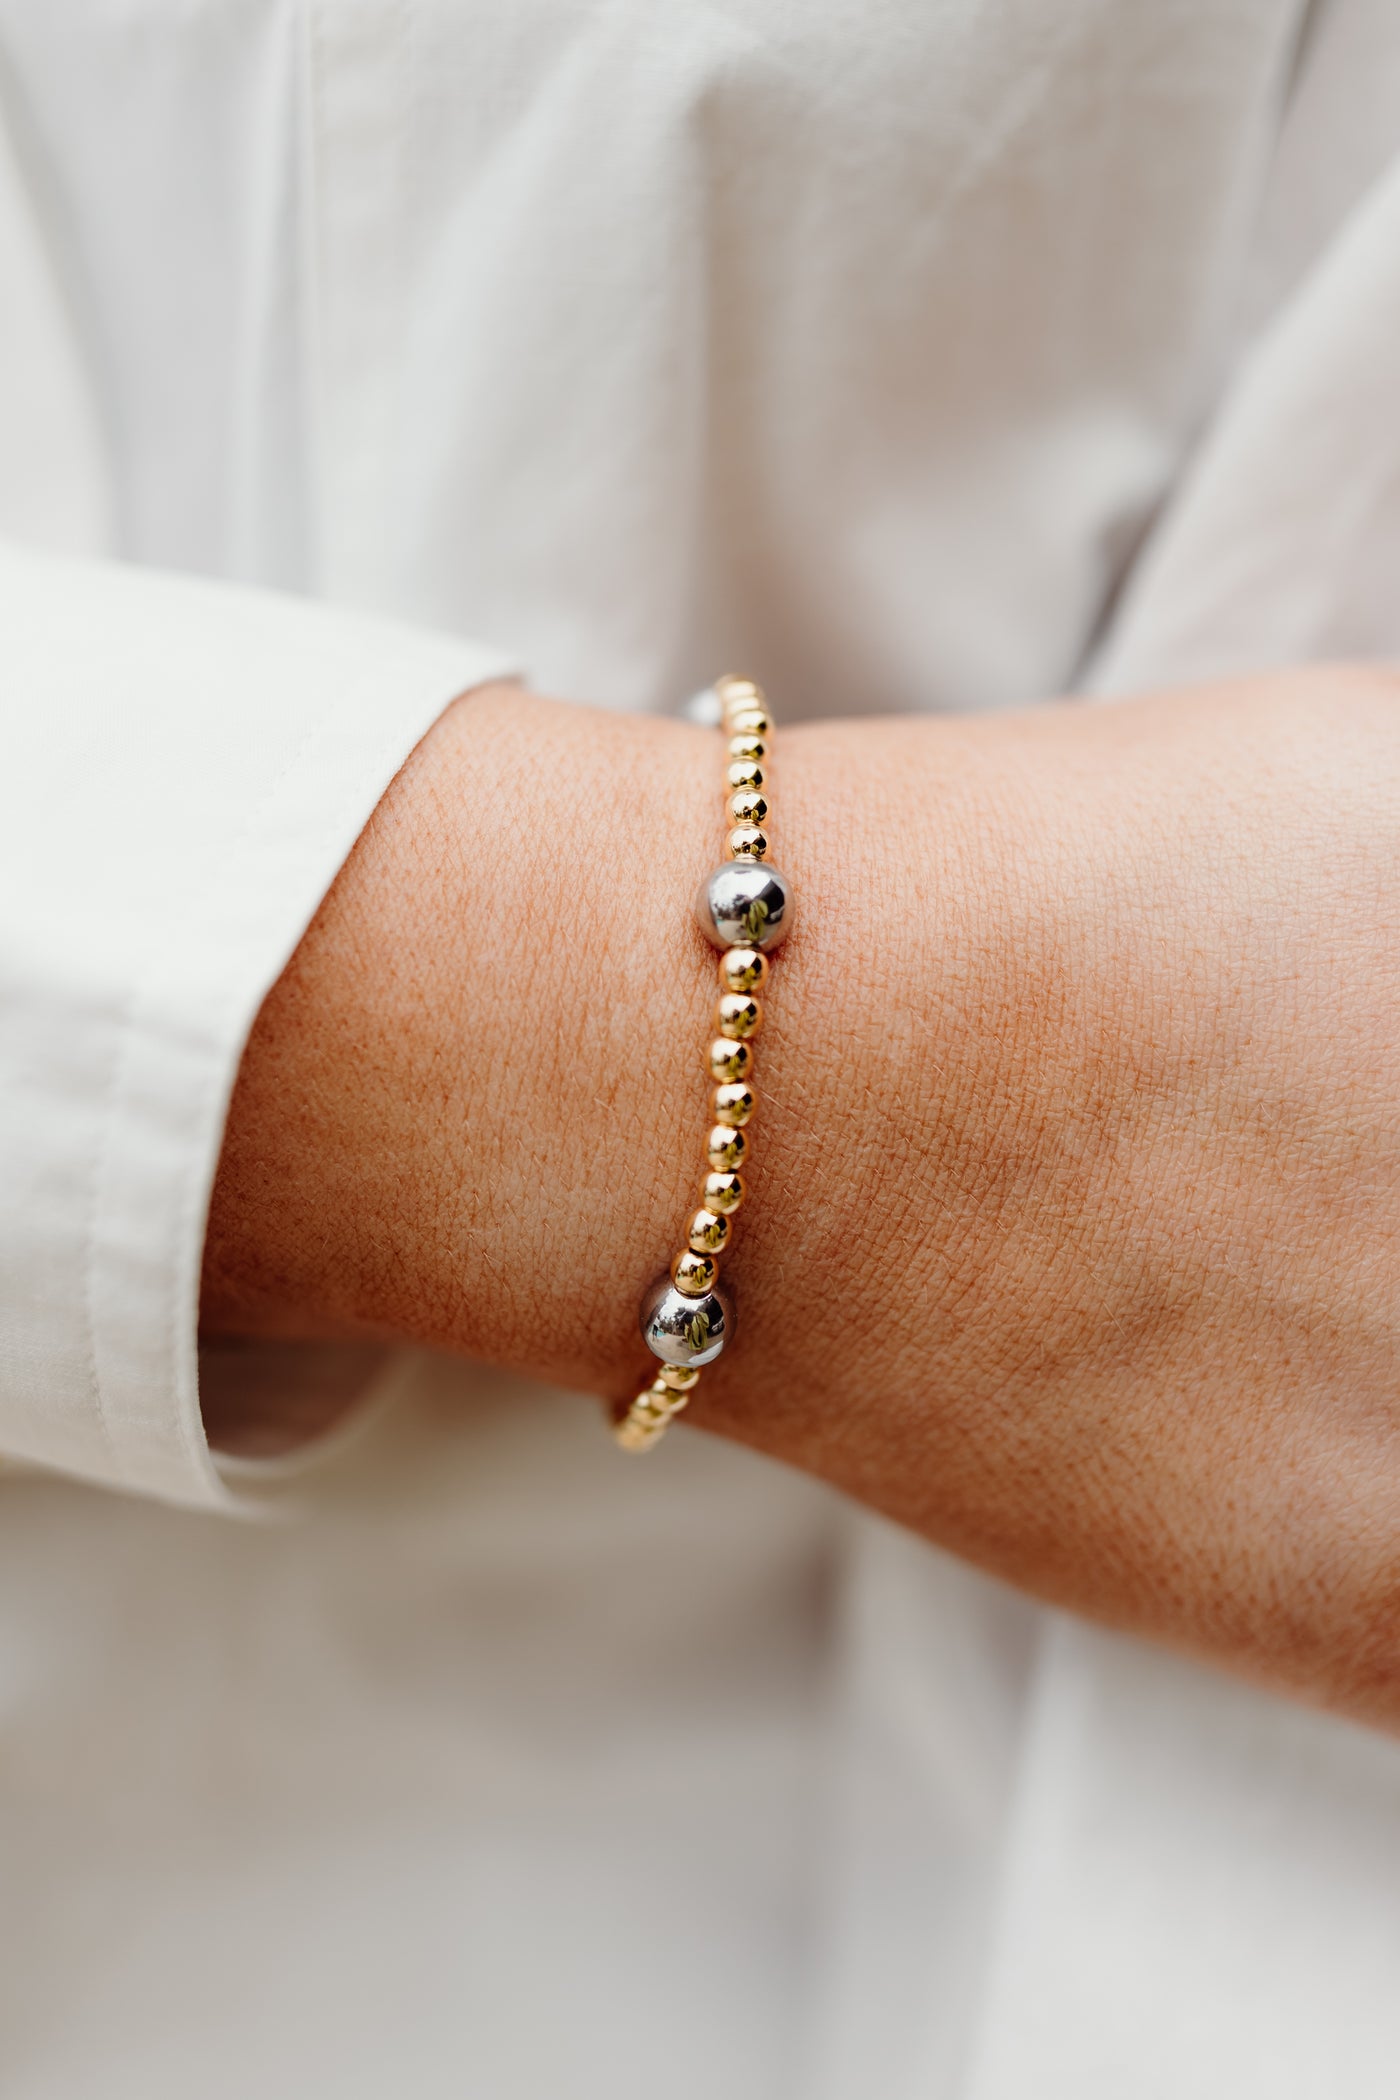 Silver and Gold Stainless Steel Beaded Bracelet